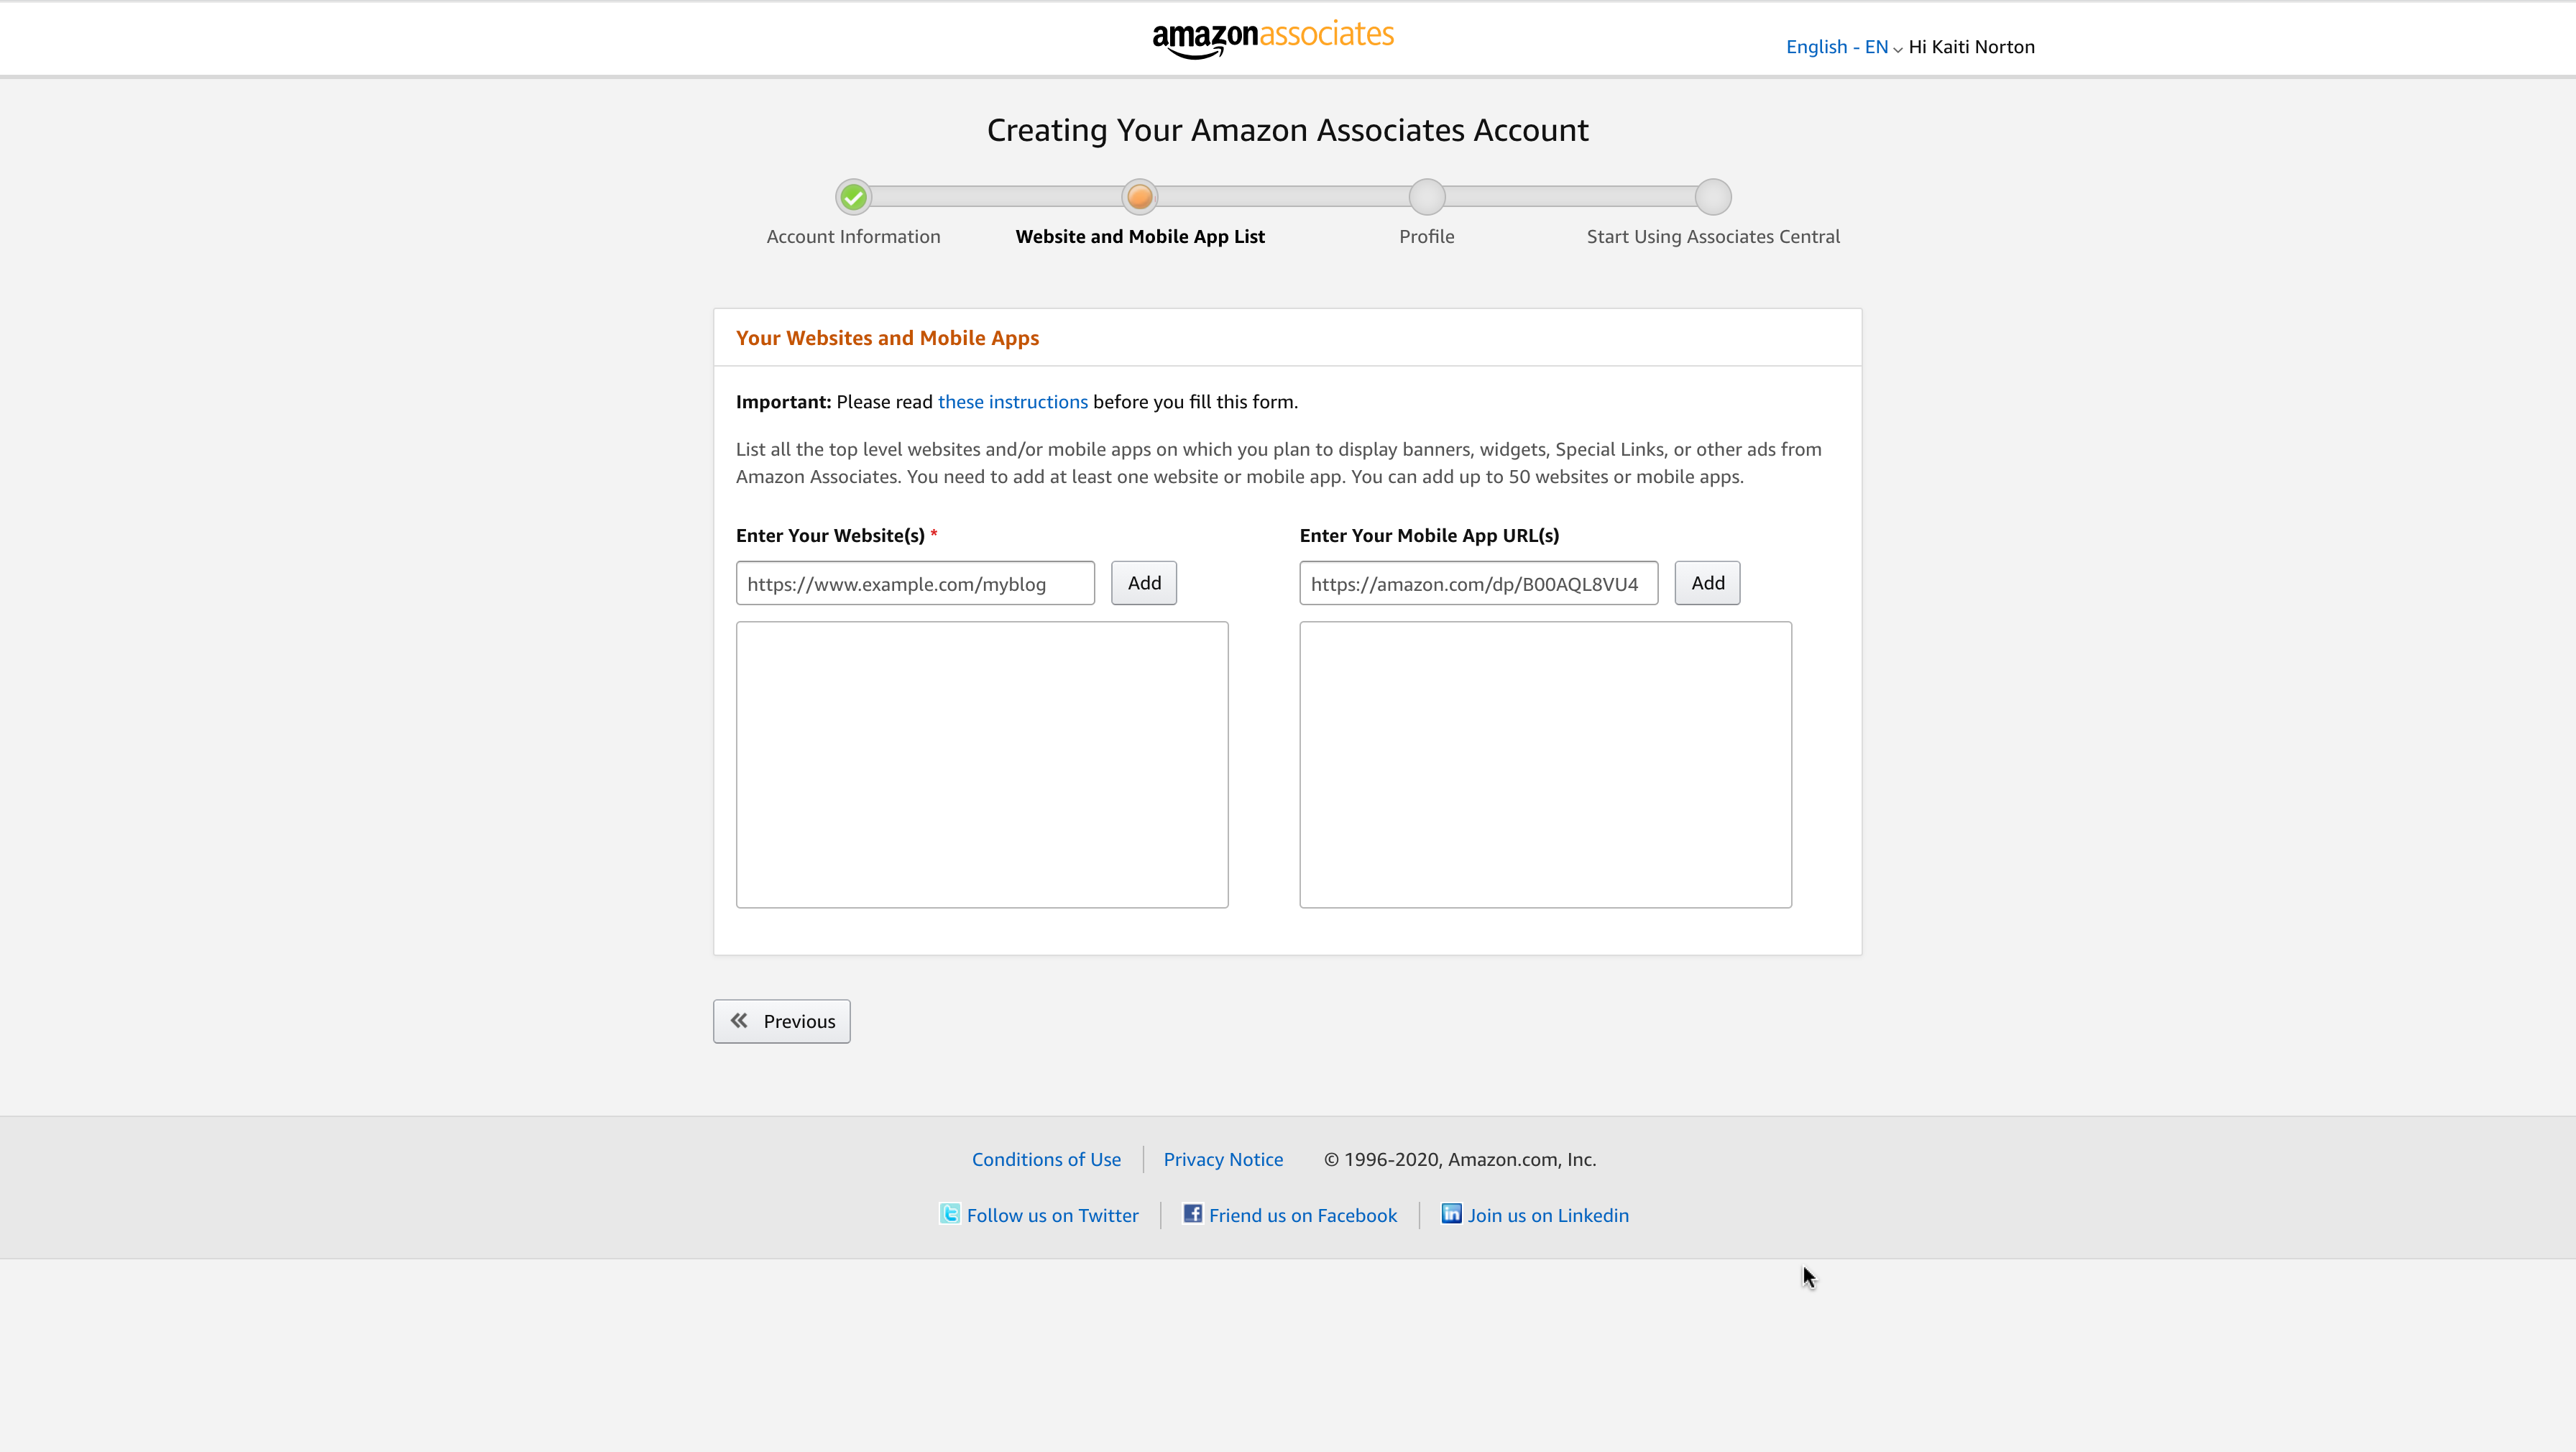 Image of Amazon Associates sign up with website URL page.